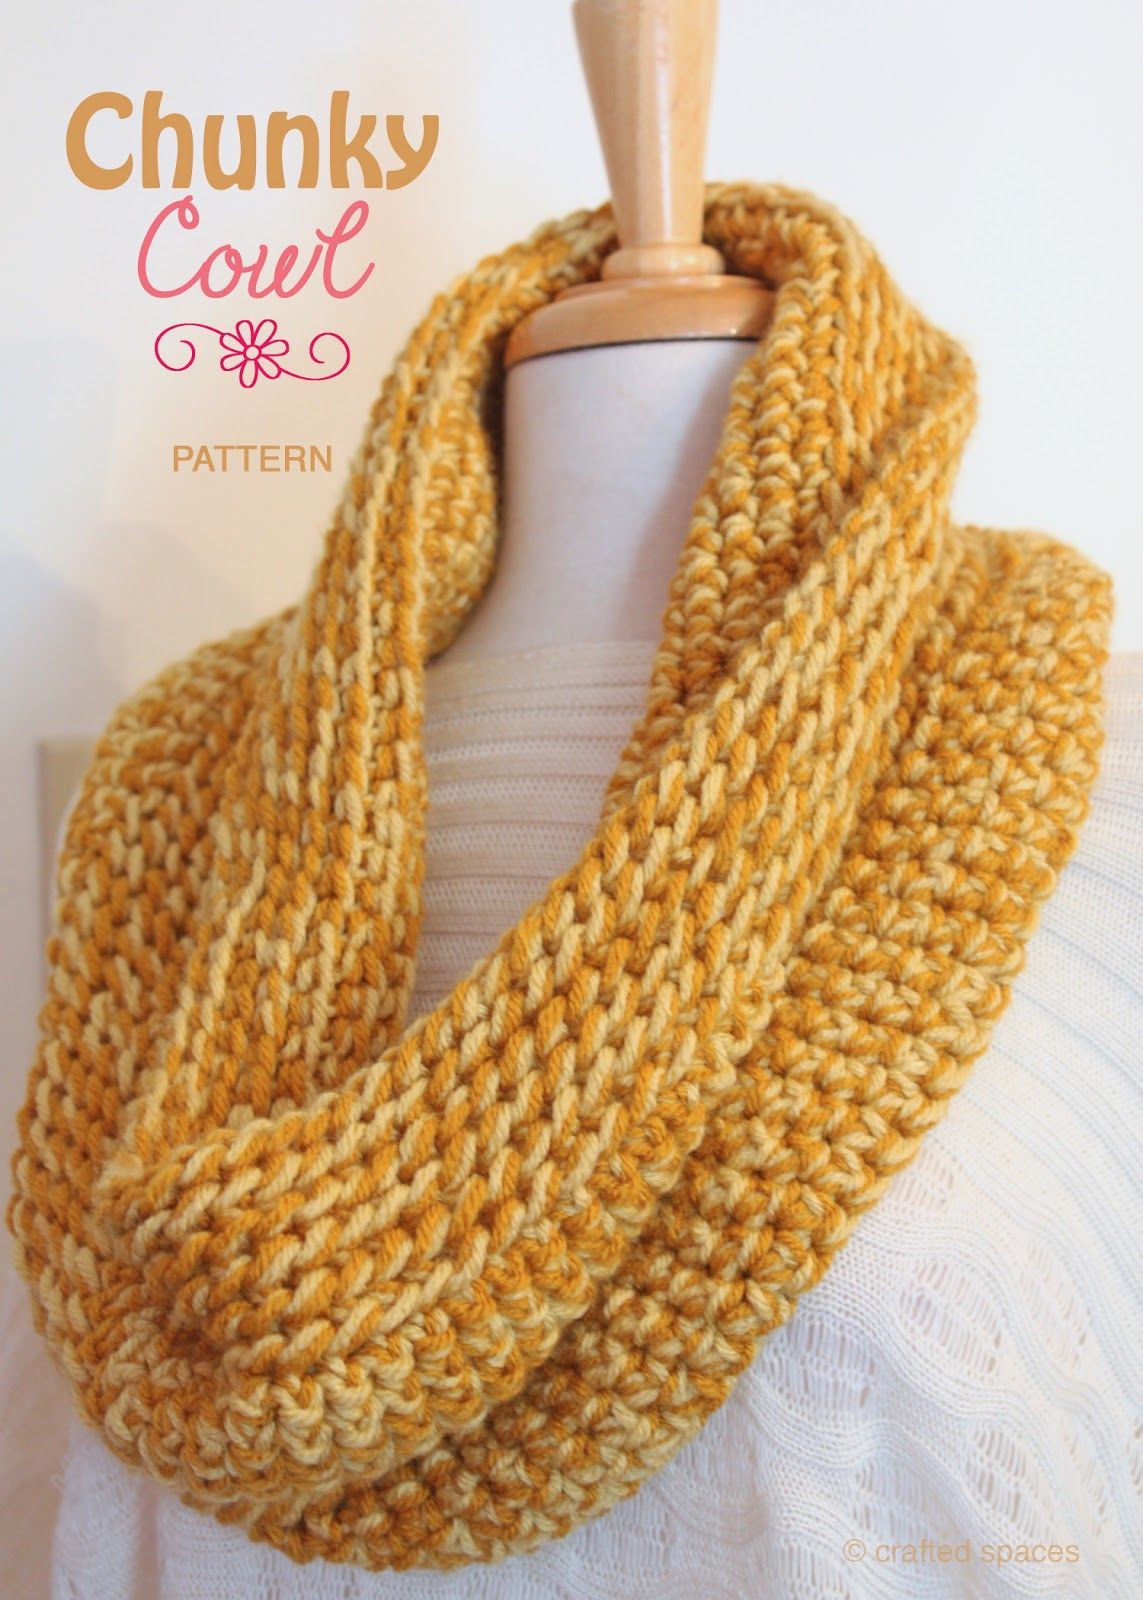 Crafted Spaces Chunky Crochet Cowl Pattern